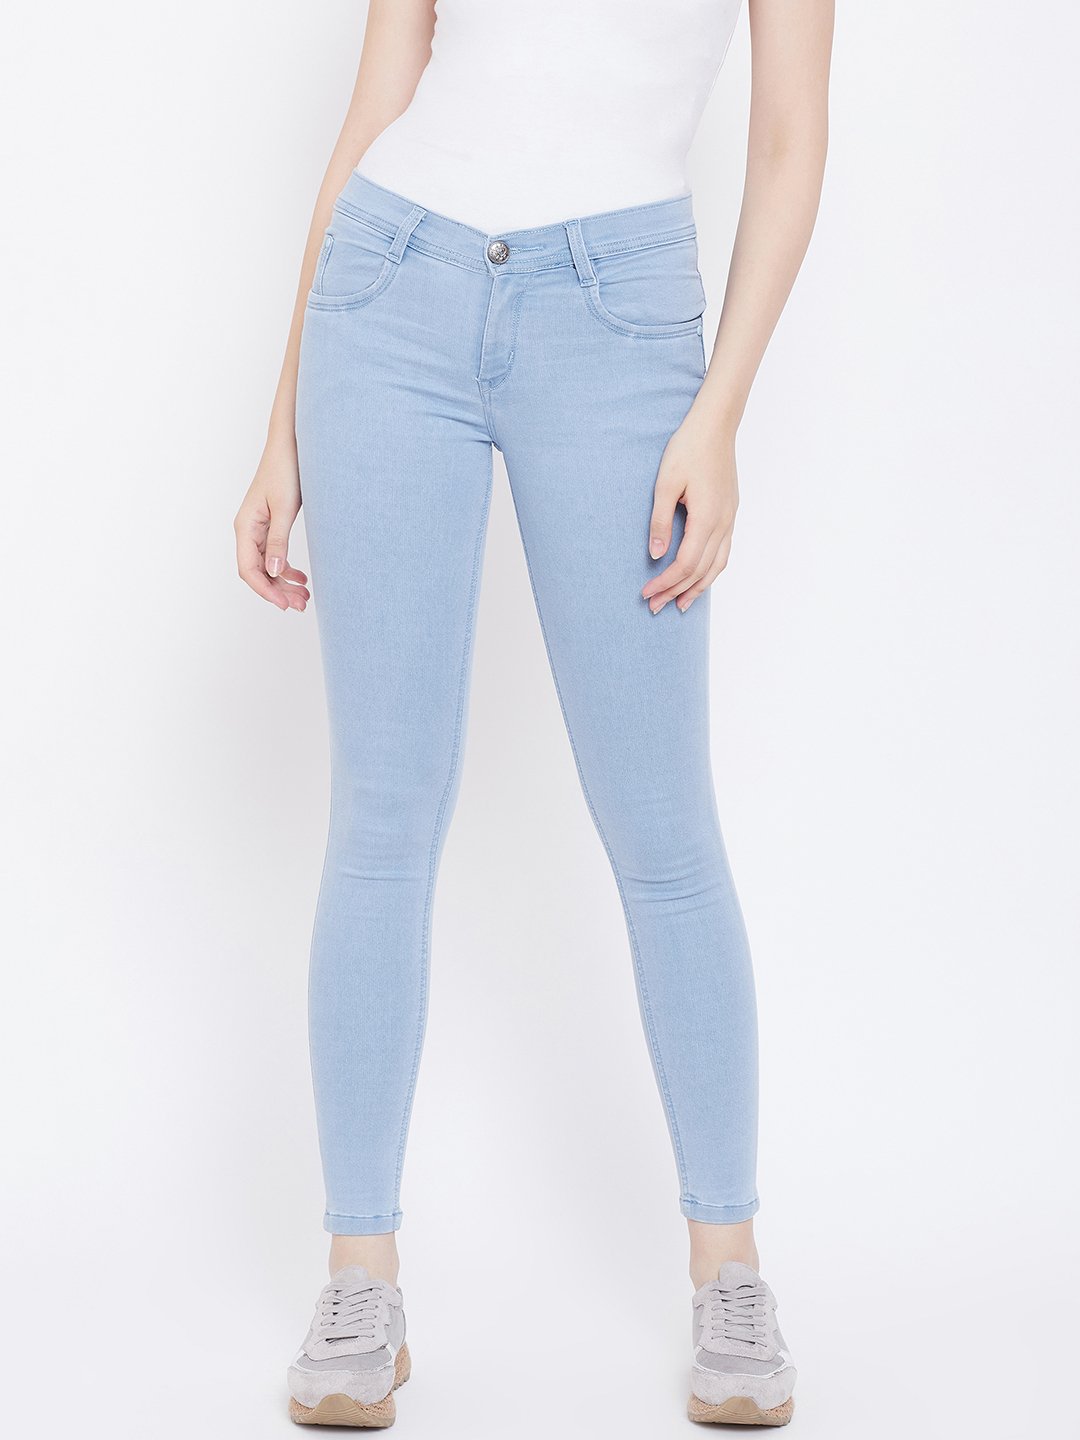 Slim Fit Stretchable Sky Blue Jeans - NiftyJeans